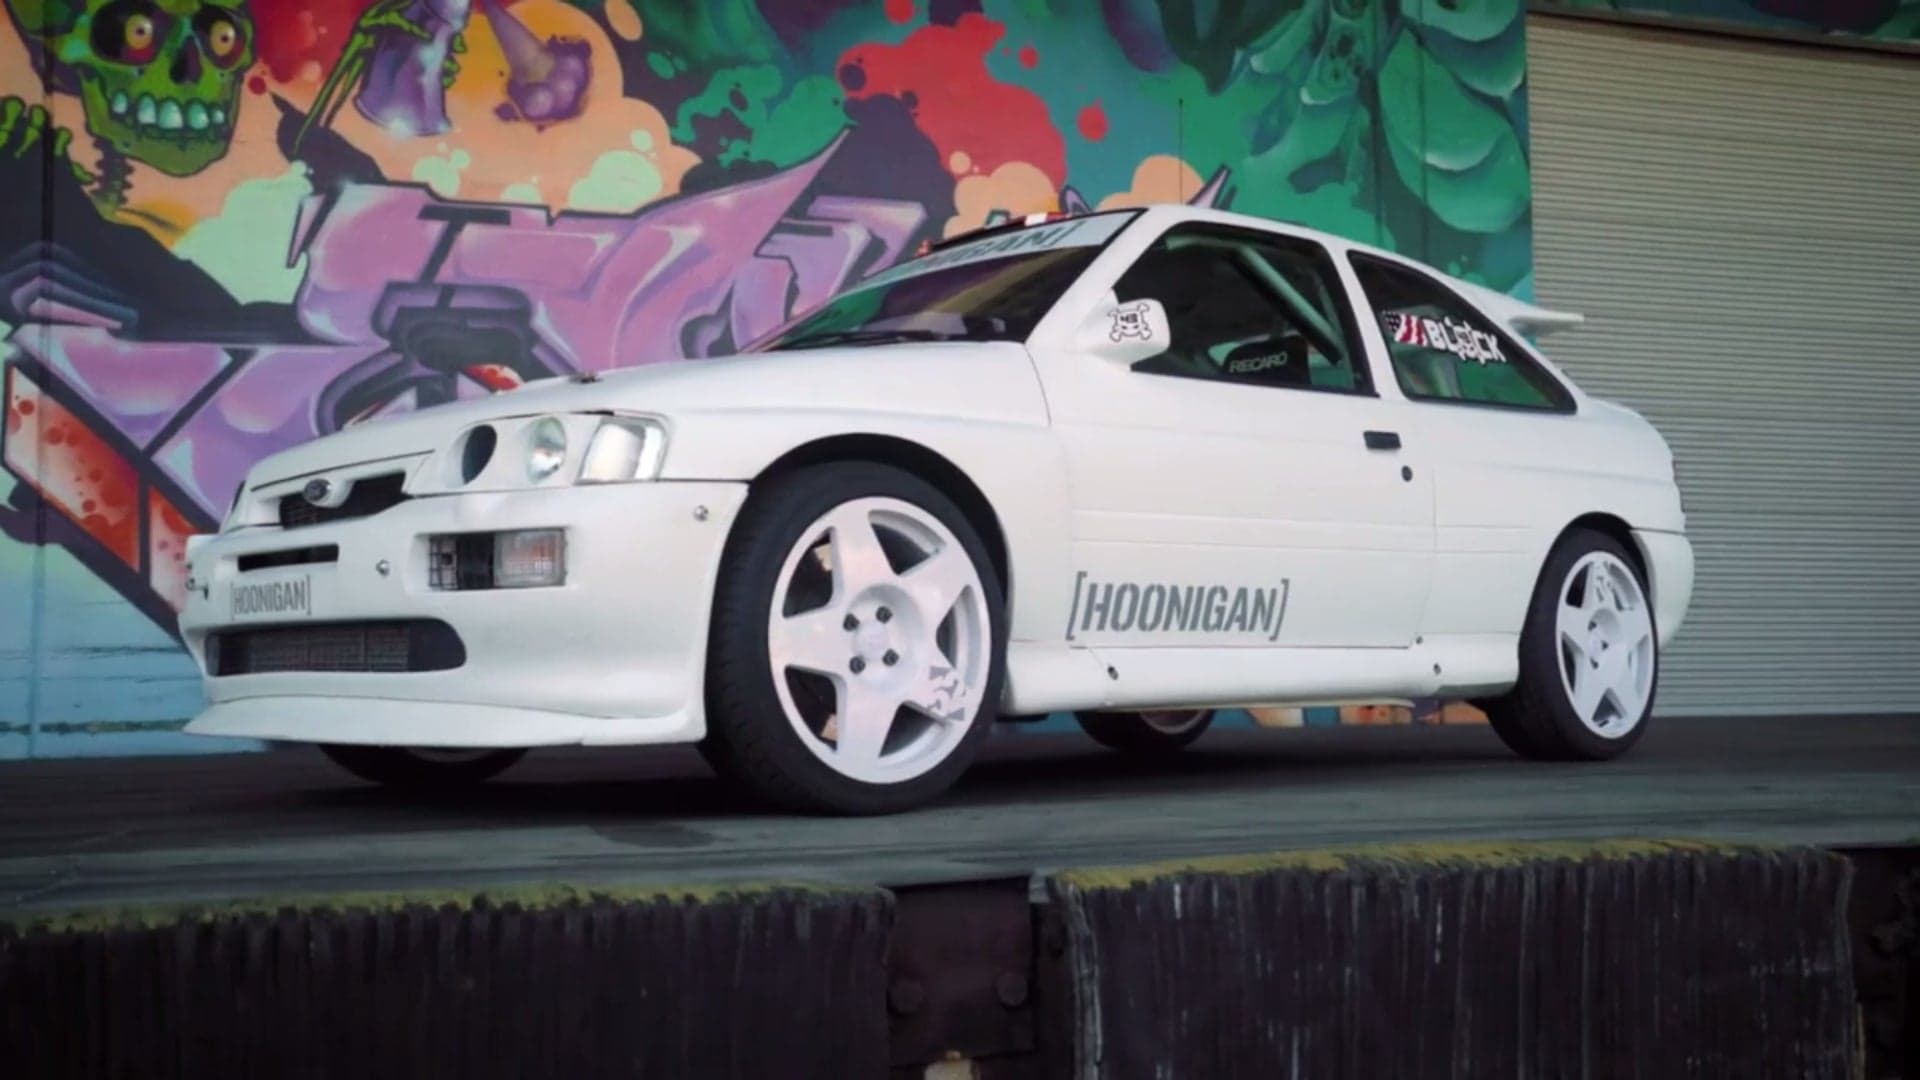 Ken Block Gets A New Toy And Rips Some Donuts